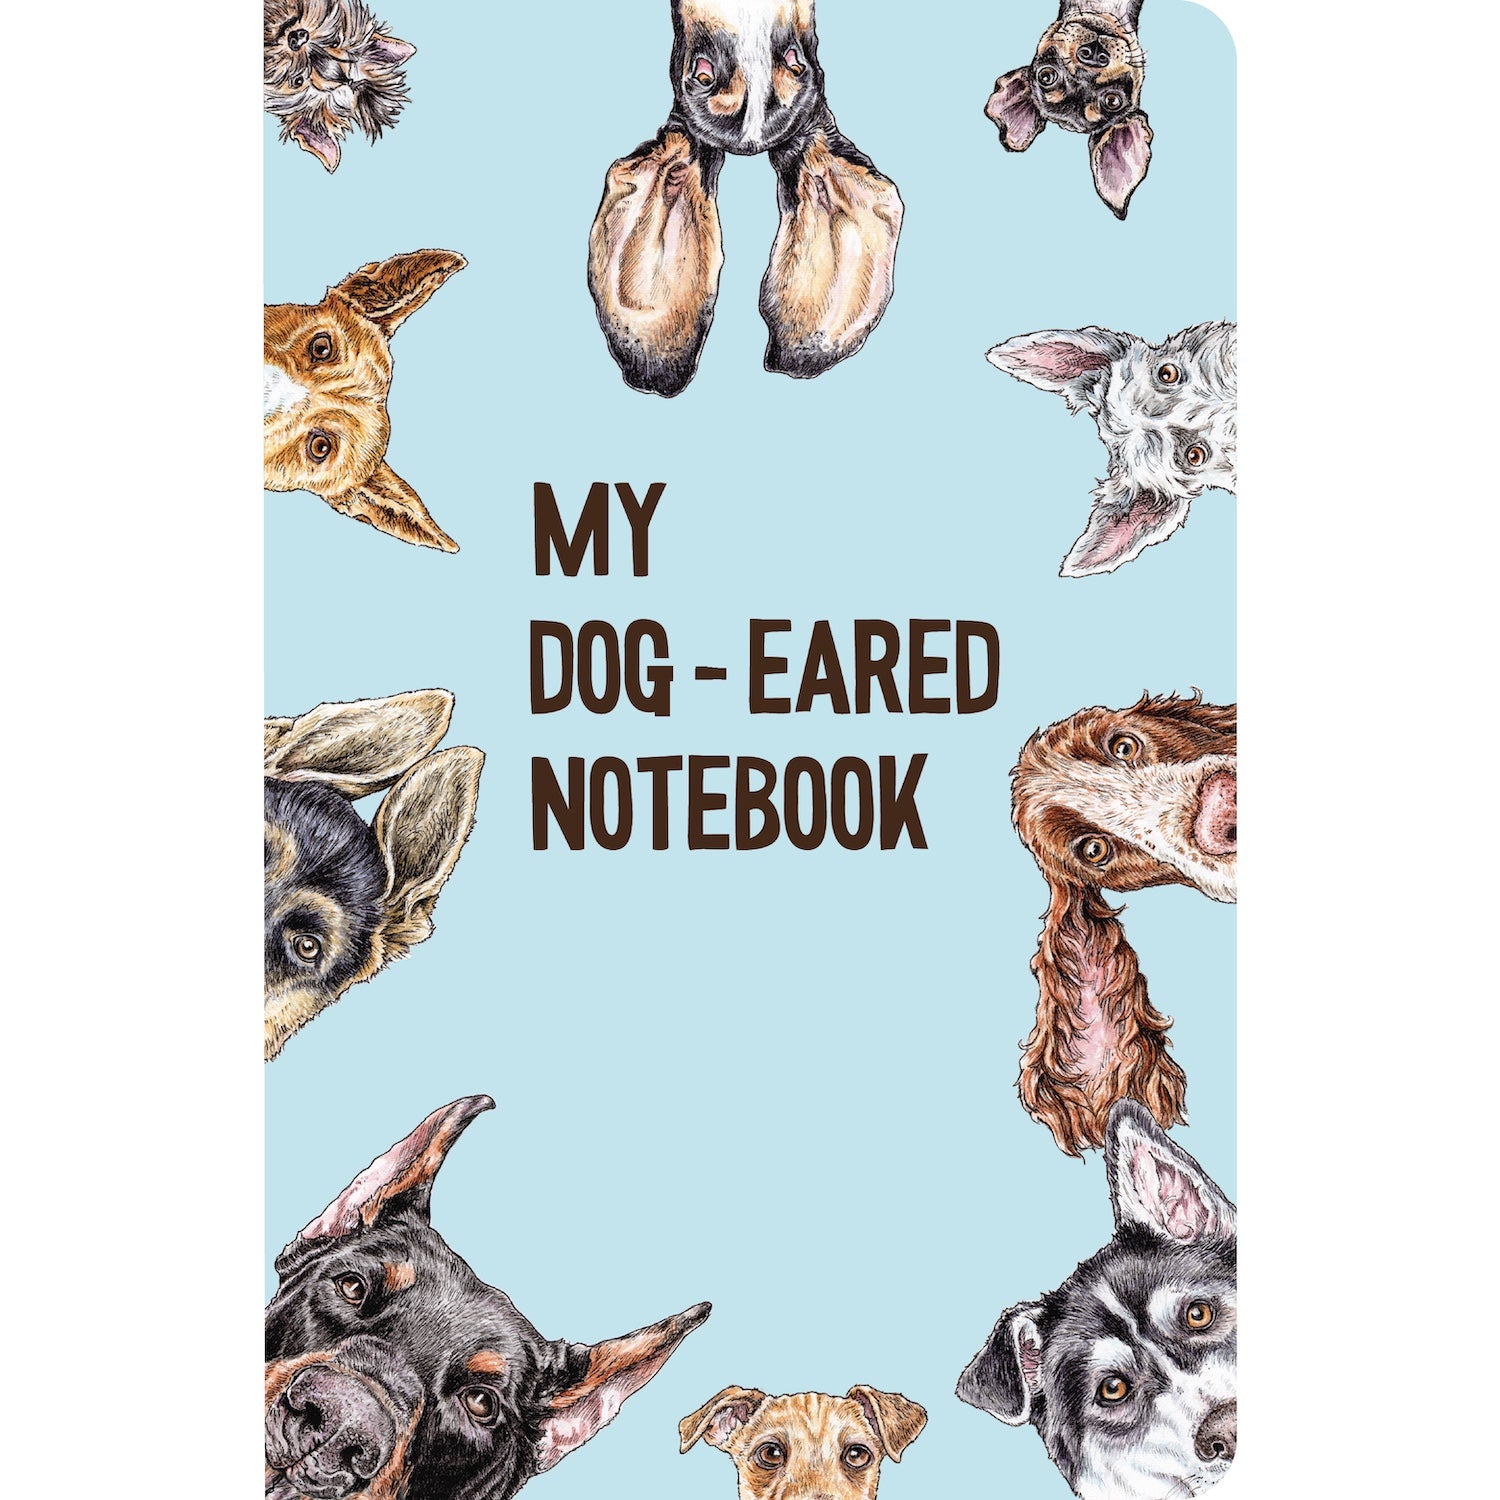 The front cover of the Dog-Eared Notebook features ten different breeds of dog peeking in from the edges of the card, showing off their various ears and surrounding the caption: &quot;MY DOG-EARED NOTEBOOK&quot; over a baby blue background.